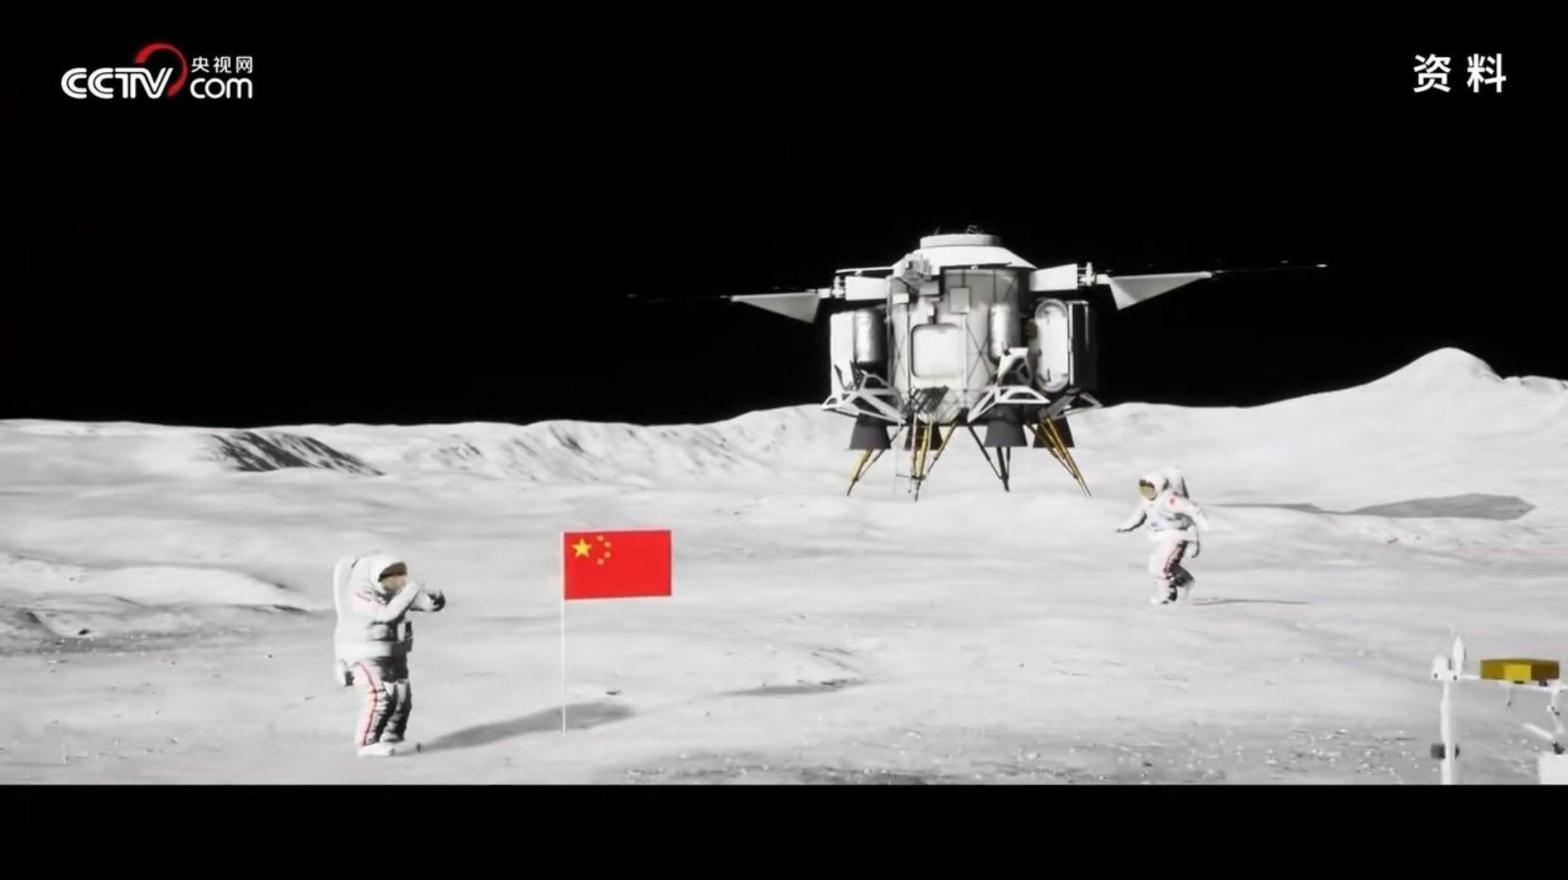 A new video showed what China's planned lunar mission would look like. (Screenshot: CCTV)